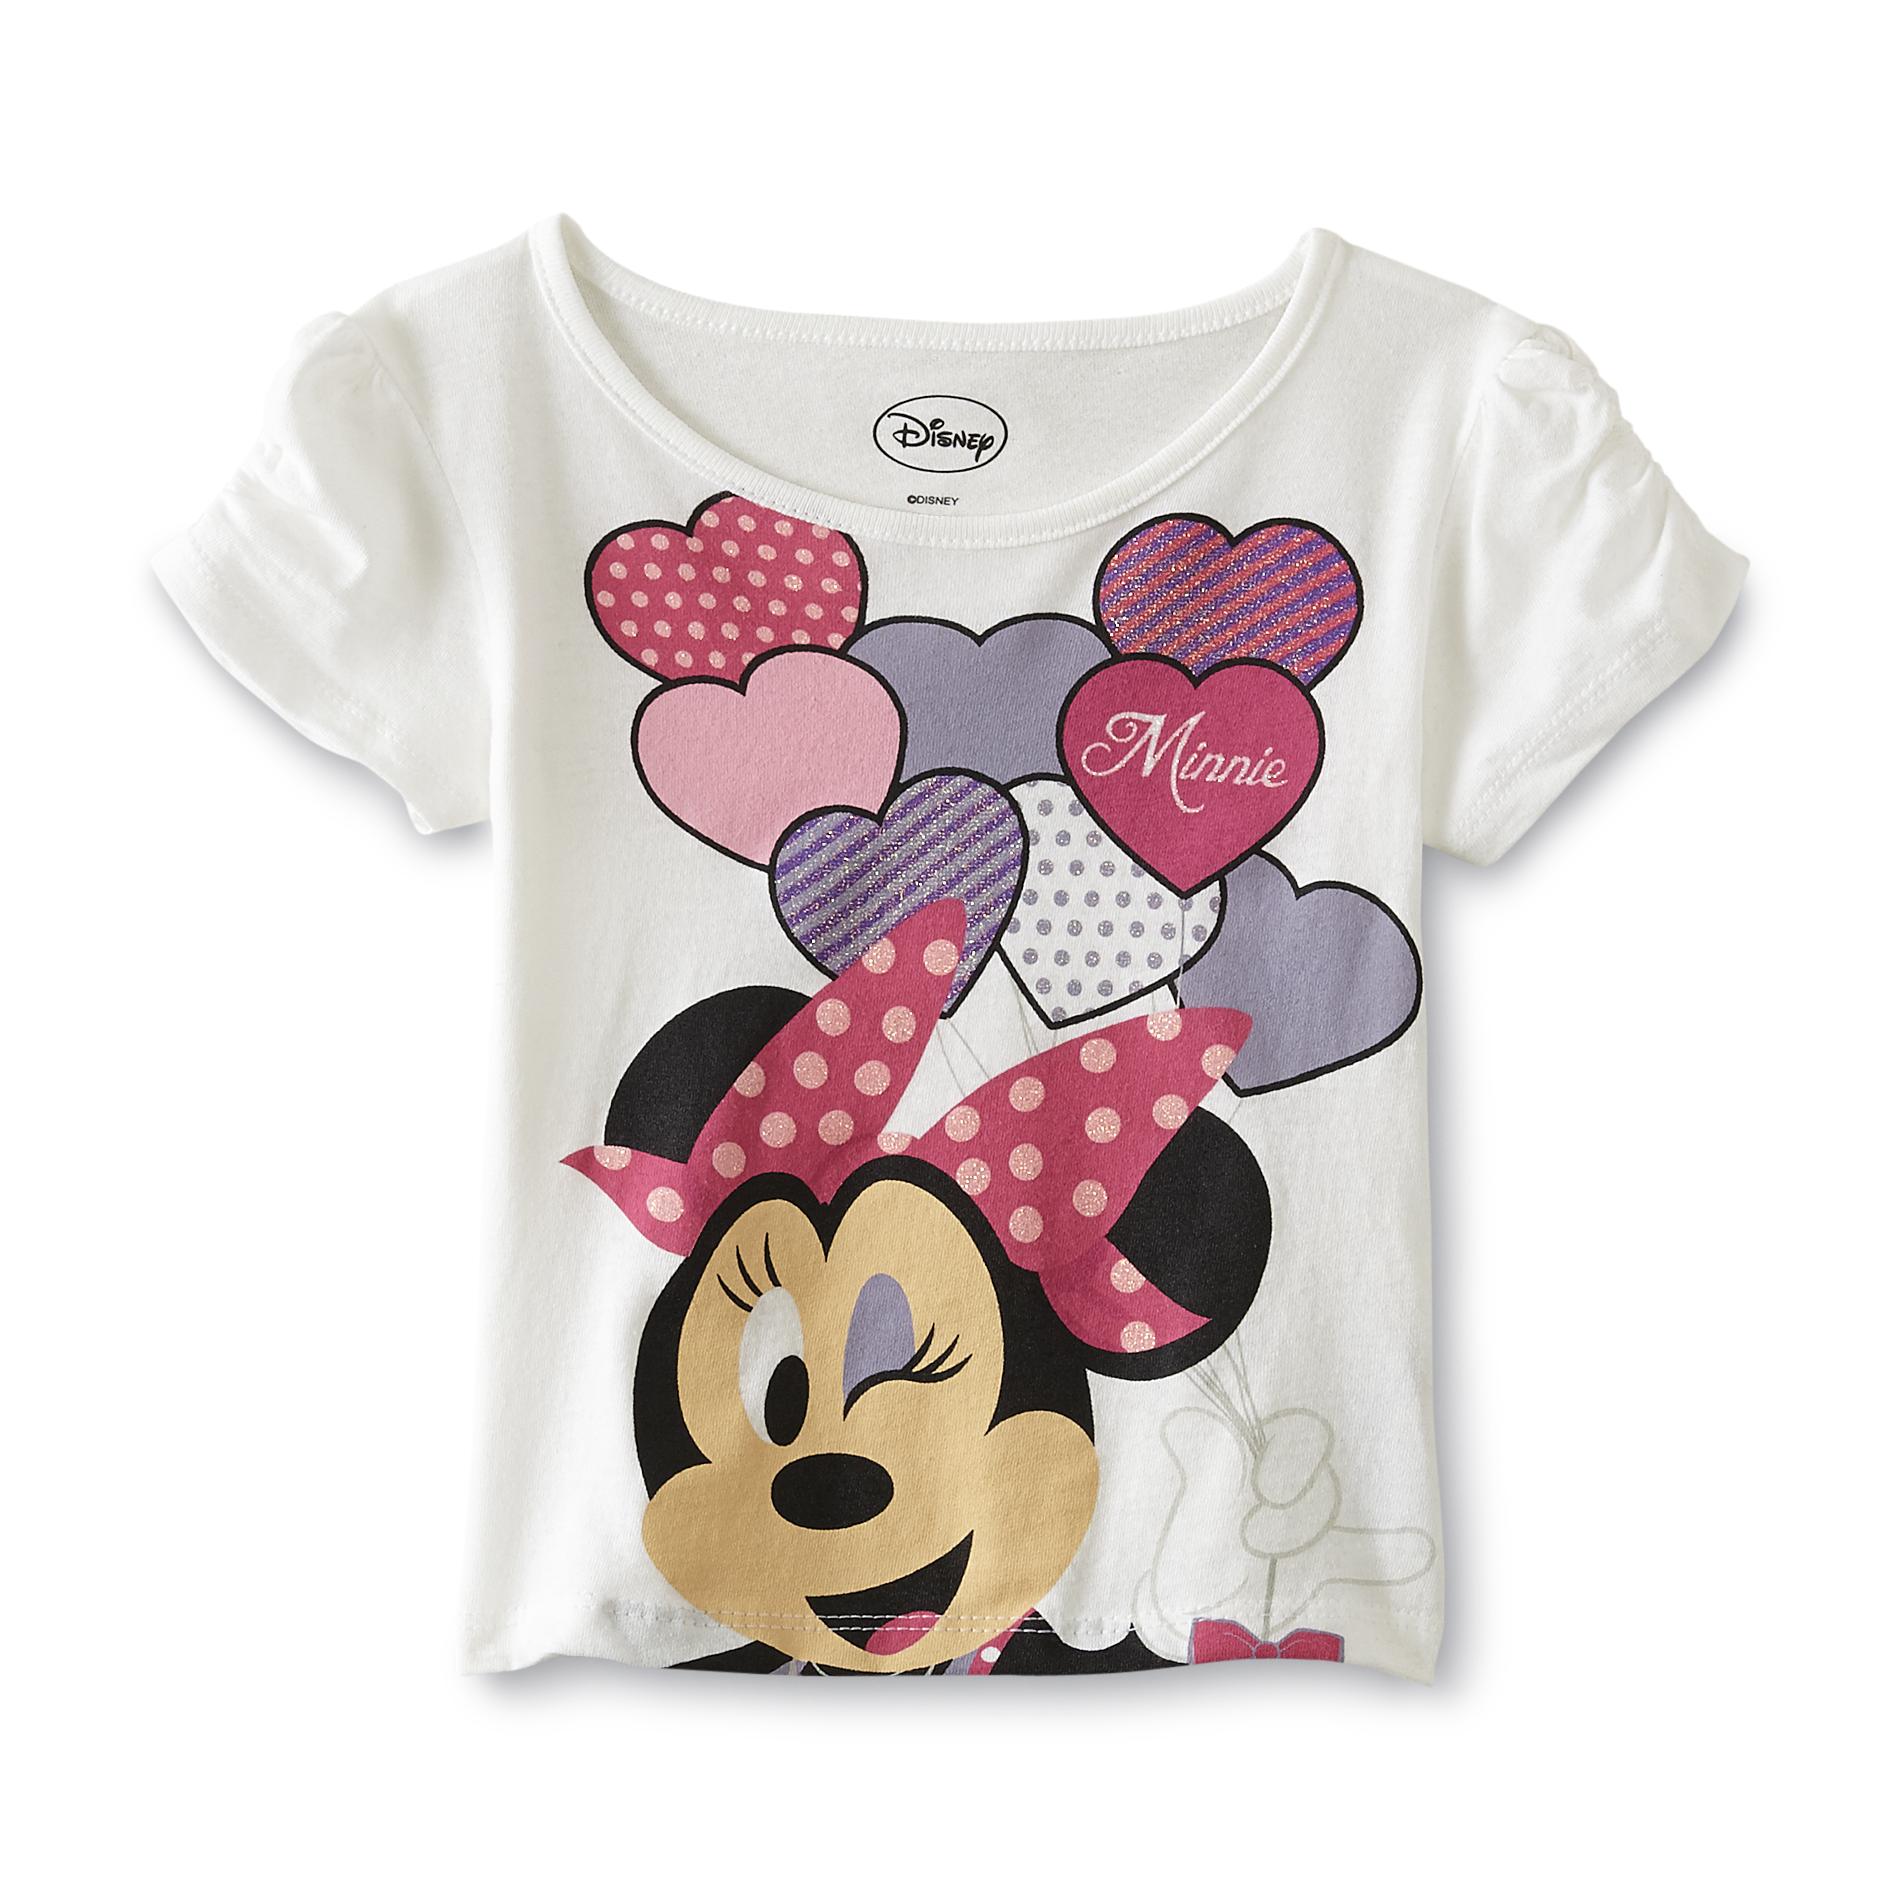 Disney Toddler Girl's Minnie Mouse Graphic T- Shirt